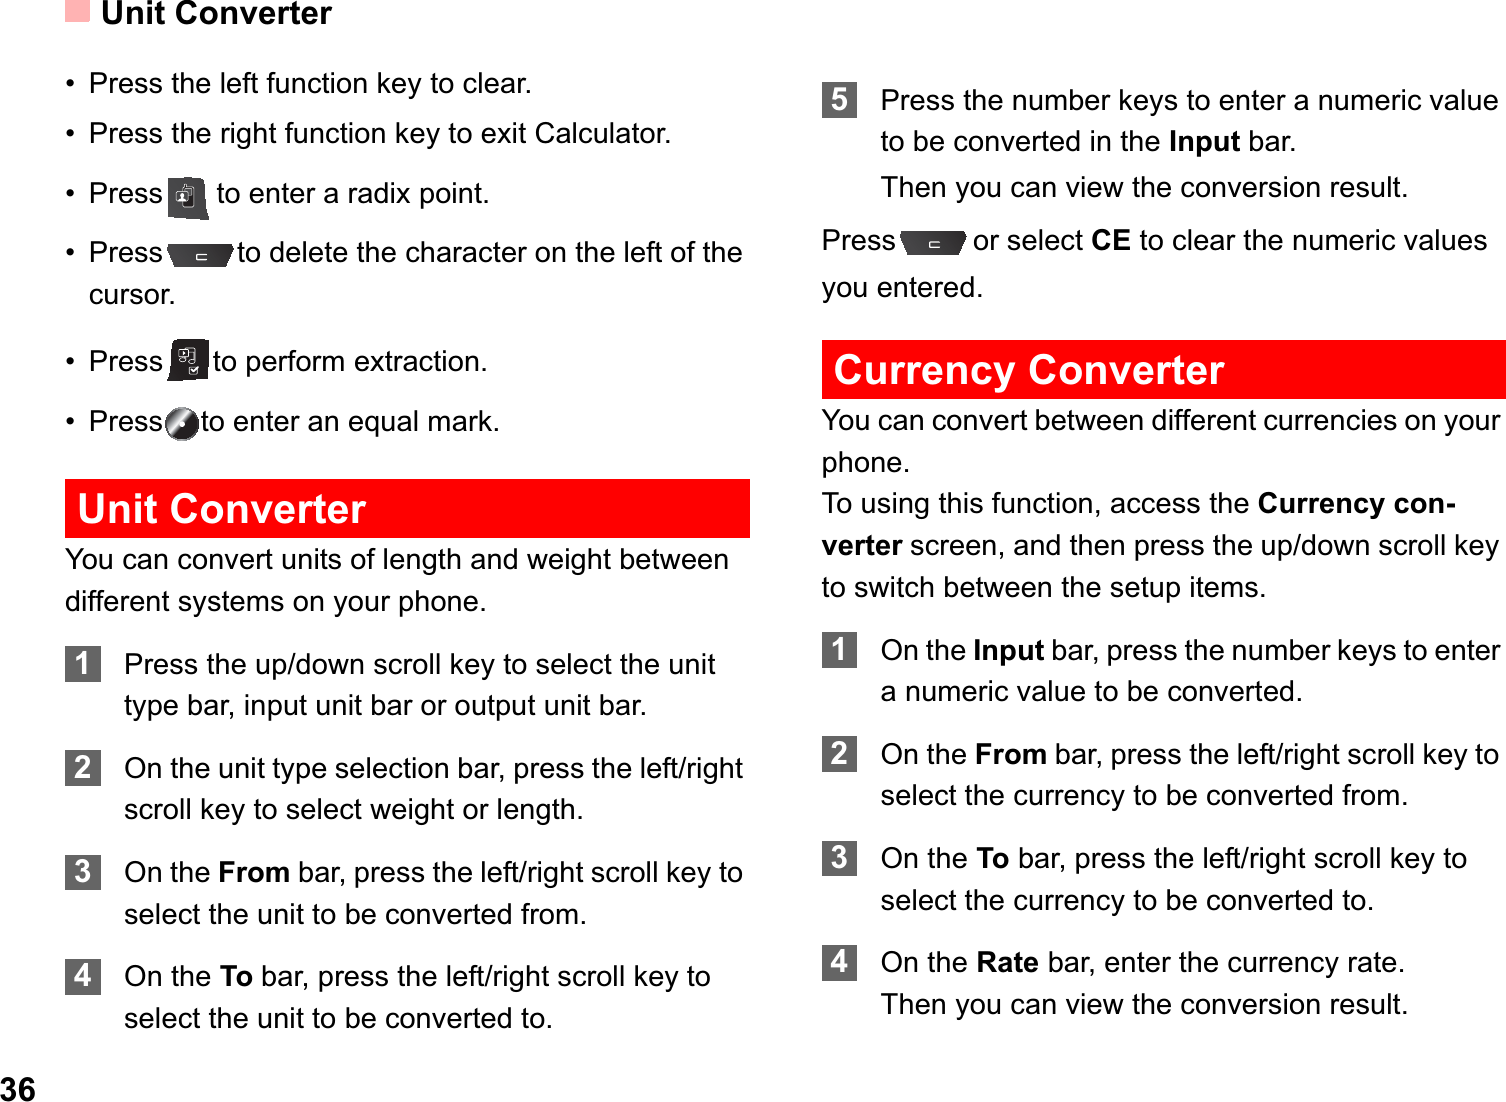 Unit Converter36• Press the left function key to clear.• Press the right function key to exit Calculator.• Press to enter a radix point.• Press to delete the character on the left of the cursor.• Press to perform extraction.• Press to enter an equal mark.Unit ConverterYou can convert units of length and weight between different systems on your phone.1Press the up/down scroll key to select the unit type bar, input unit bar or output unit bar.2On the unit type selection bar, press the left/right scroll key to select weight or length.3On the From bar, press the left/right scroll key to select the unit to be converted from.4On the To bar, press the left/right scroll key to select the unit to be converted to.5Press the number keys to enter a numeric value to be converted in the Input bar. Then you can view the conversion result.Press or select CE to clear the numeric values you entered.Currency ConverterYou can convert between different currencies on your phone.To using this function, access the Currency con-verter screen, and then press the up/down scroll key to switch between the setup items.1On the Input bar, press the number keys to enter a numeric value to be converted.2On the From bar, press the left/right scroll key to select the currency to be converted from.3On the To bar, press the left/right scroll key to select the currency to be converted to.4On the Rate bar, enter the currency rate.Then you can view the conversion result.